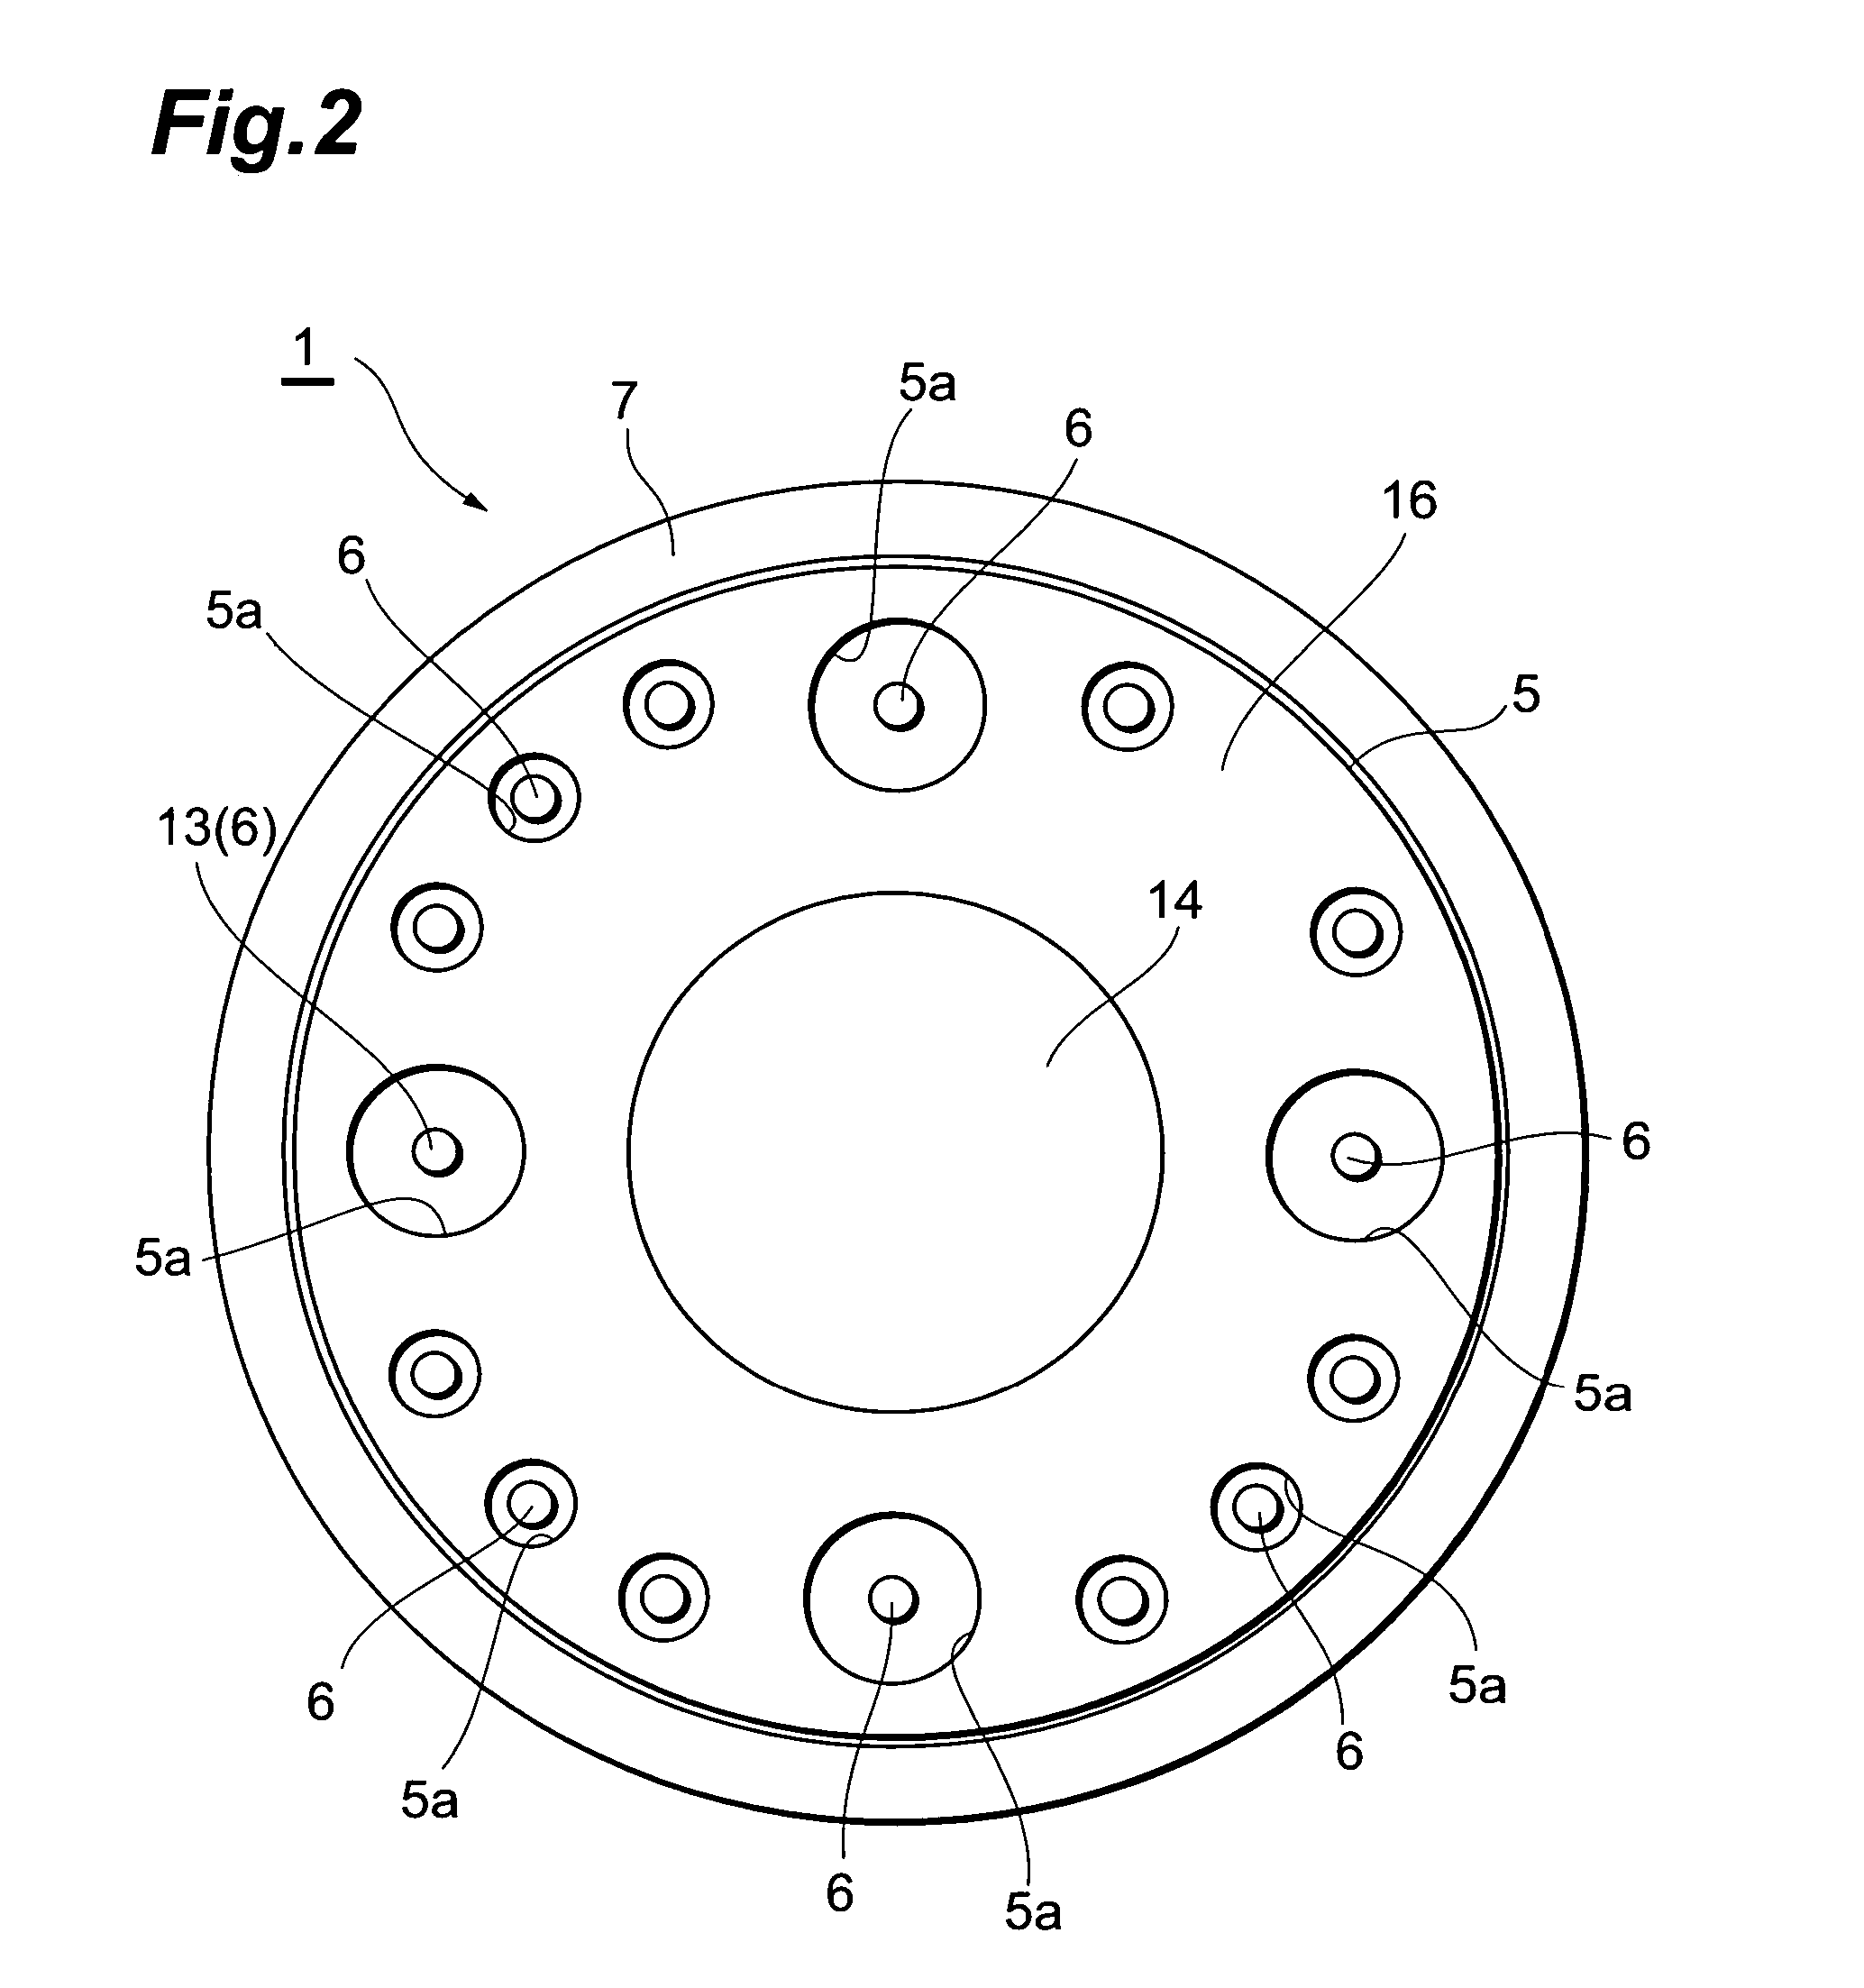 Photomultiplier with particular stem/pin structure